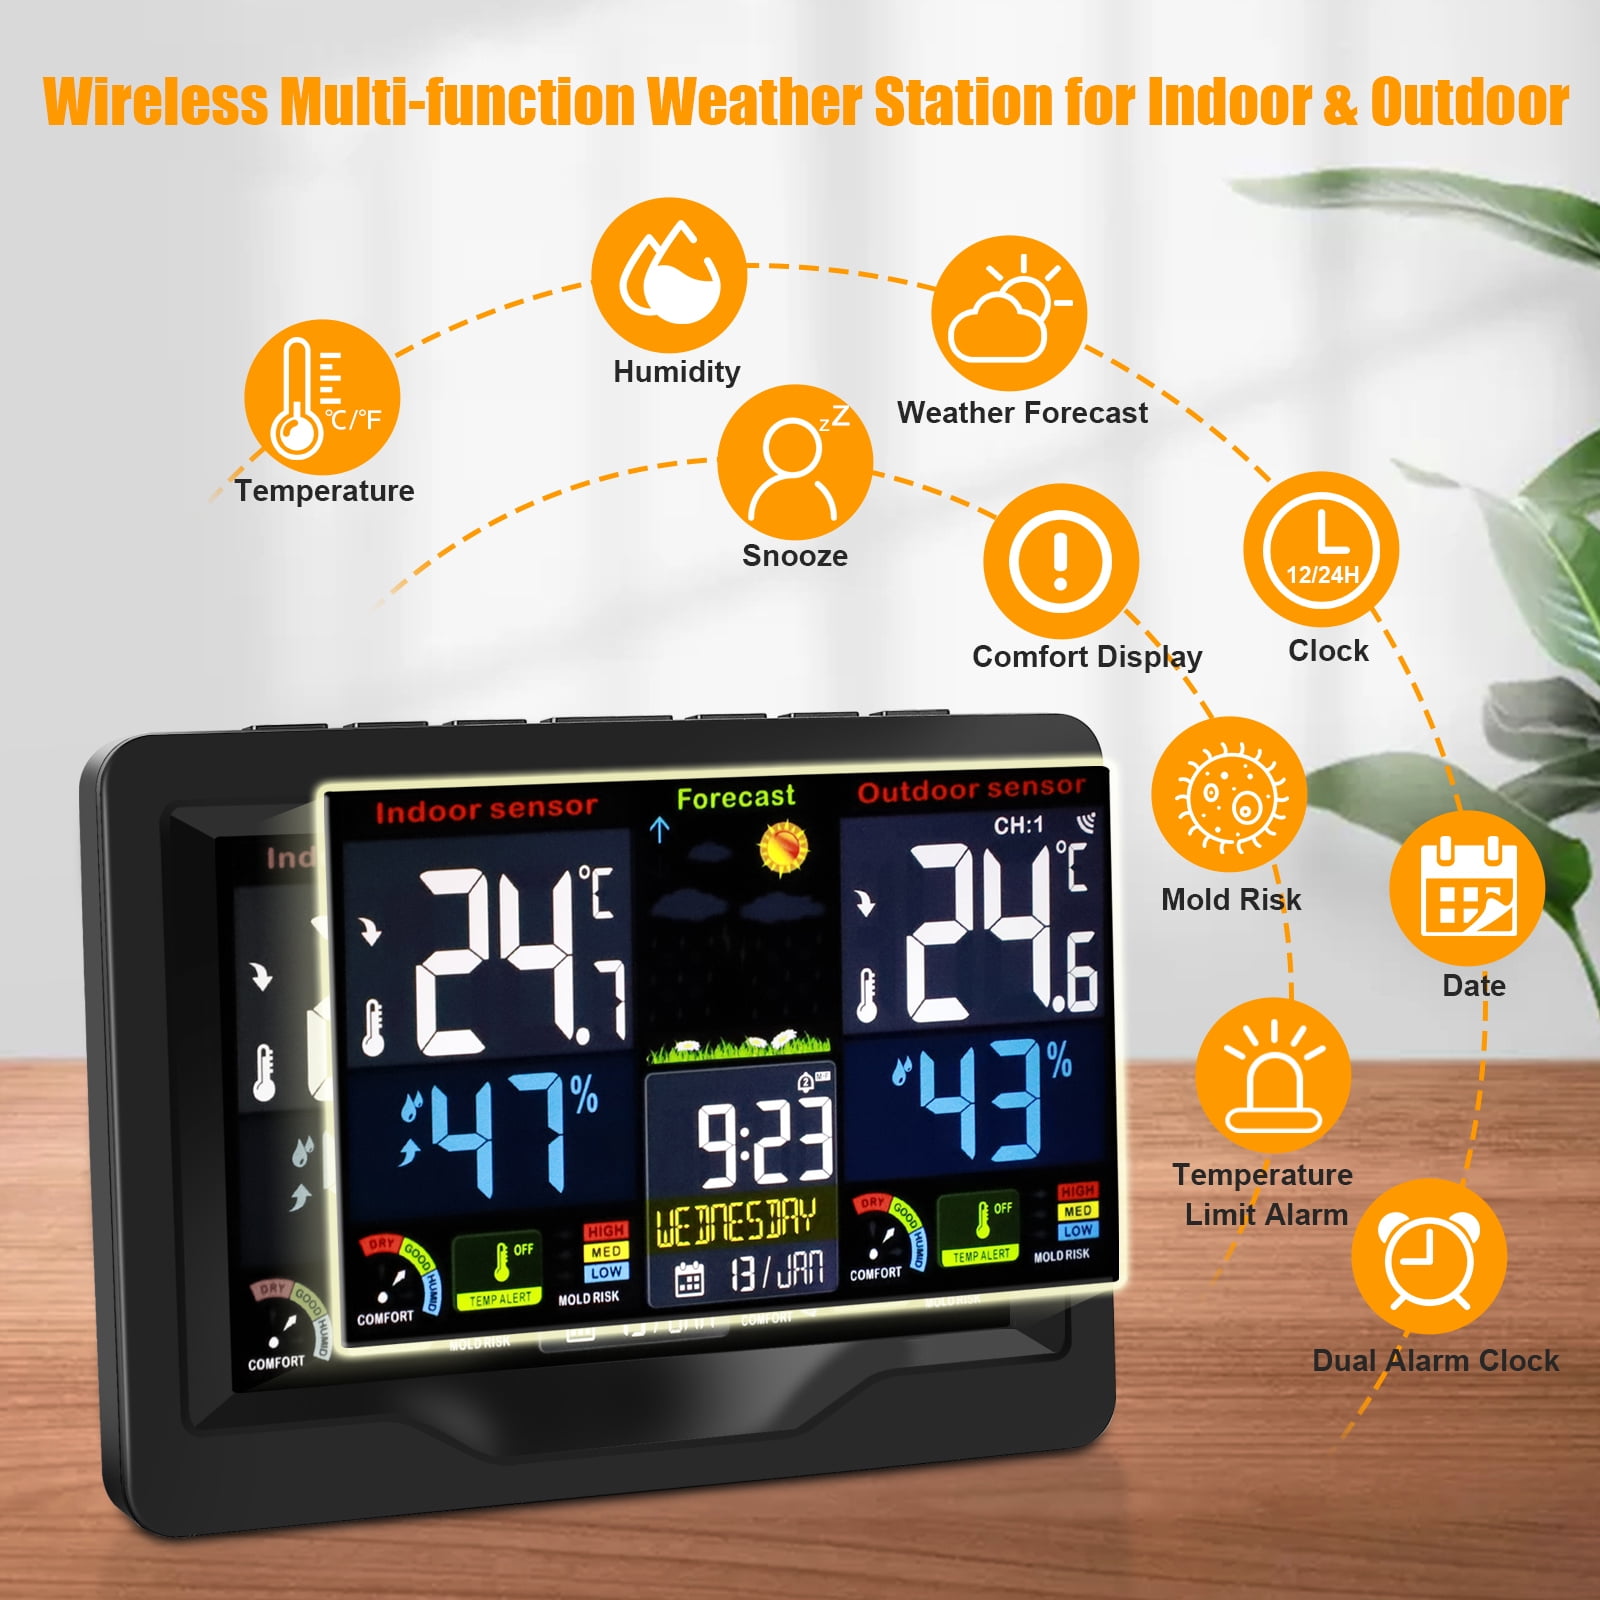 Koogeek Wireless Weather Station,Indoor Outdoor Thermometer Hygrometer with  Sensor, Digital Temperature Humidity Monitor, Alarm Clock,Weather Forecast,Color  LCD Display,Backlight, Sooze Mode Brand 